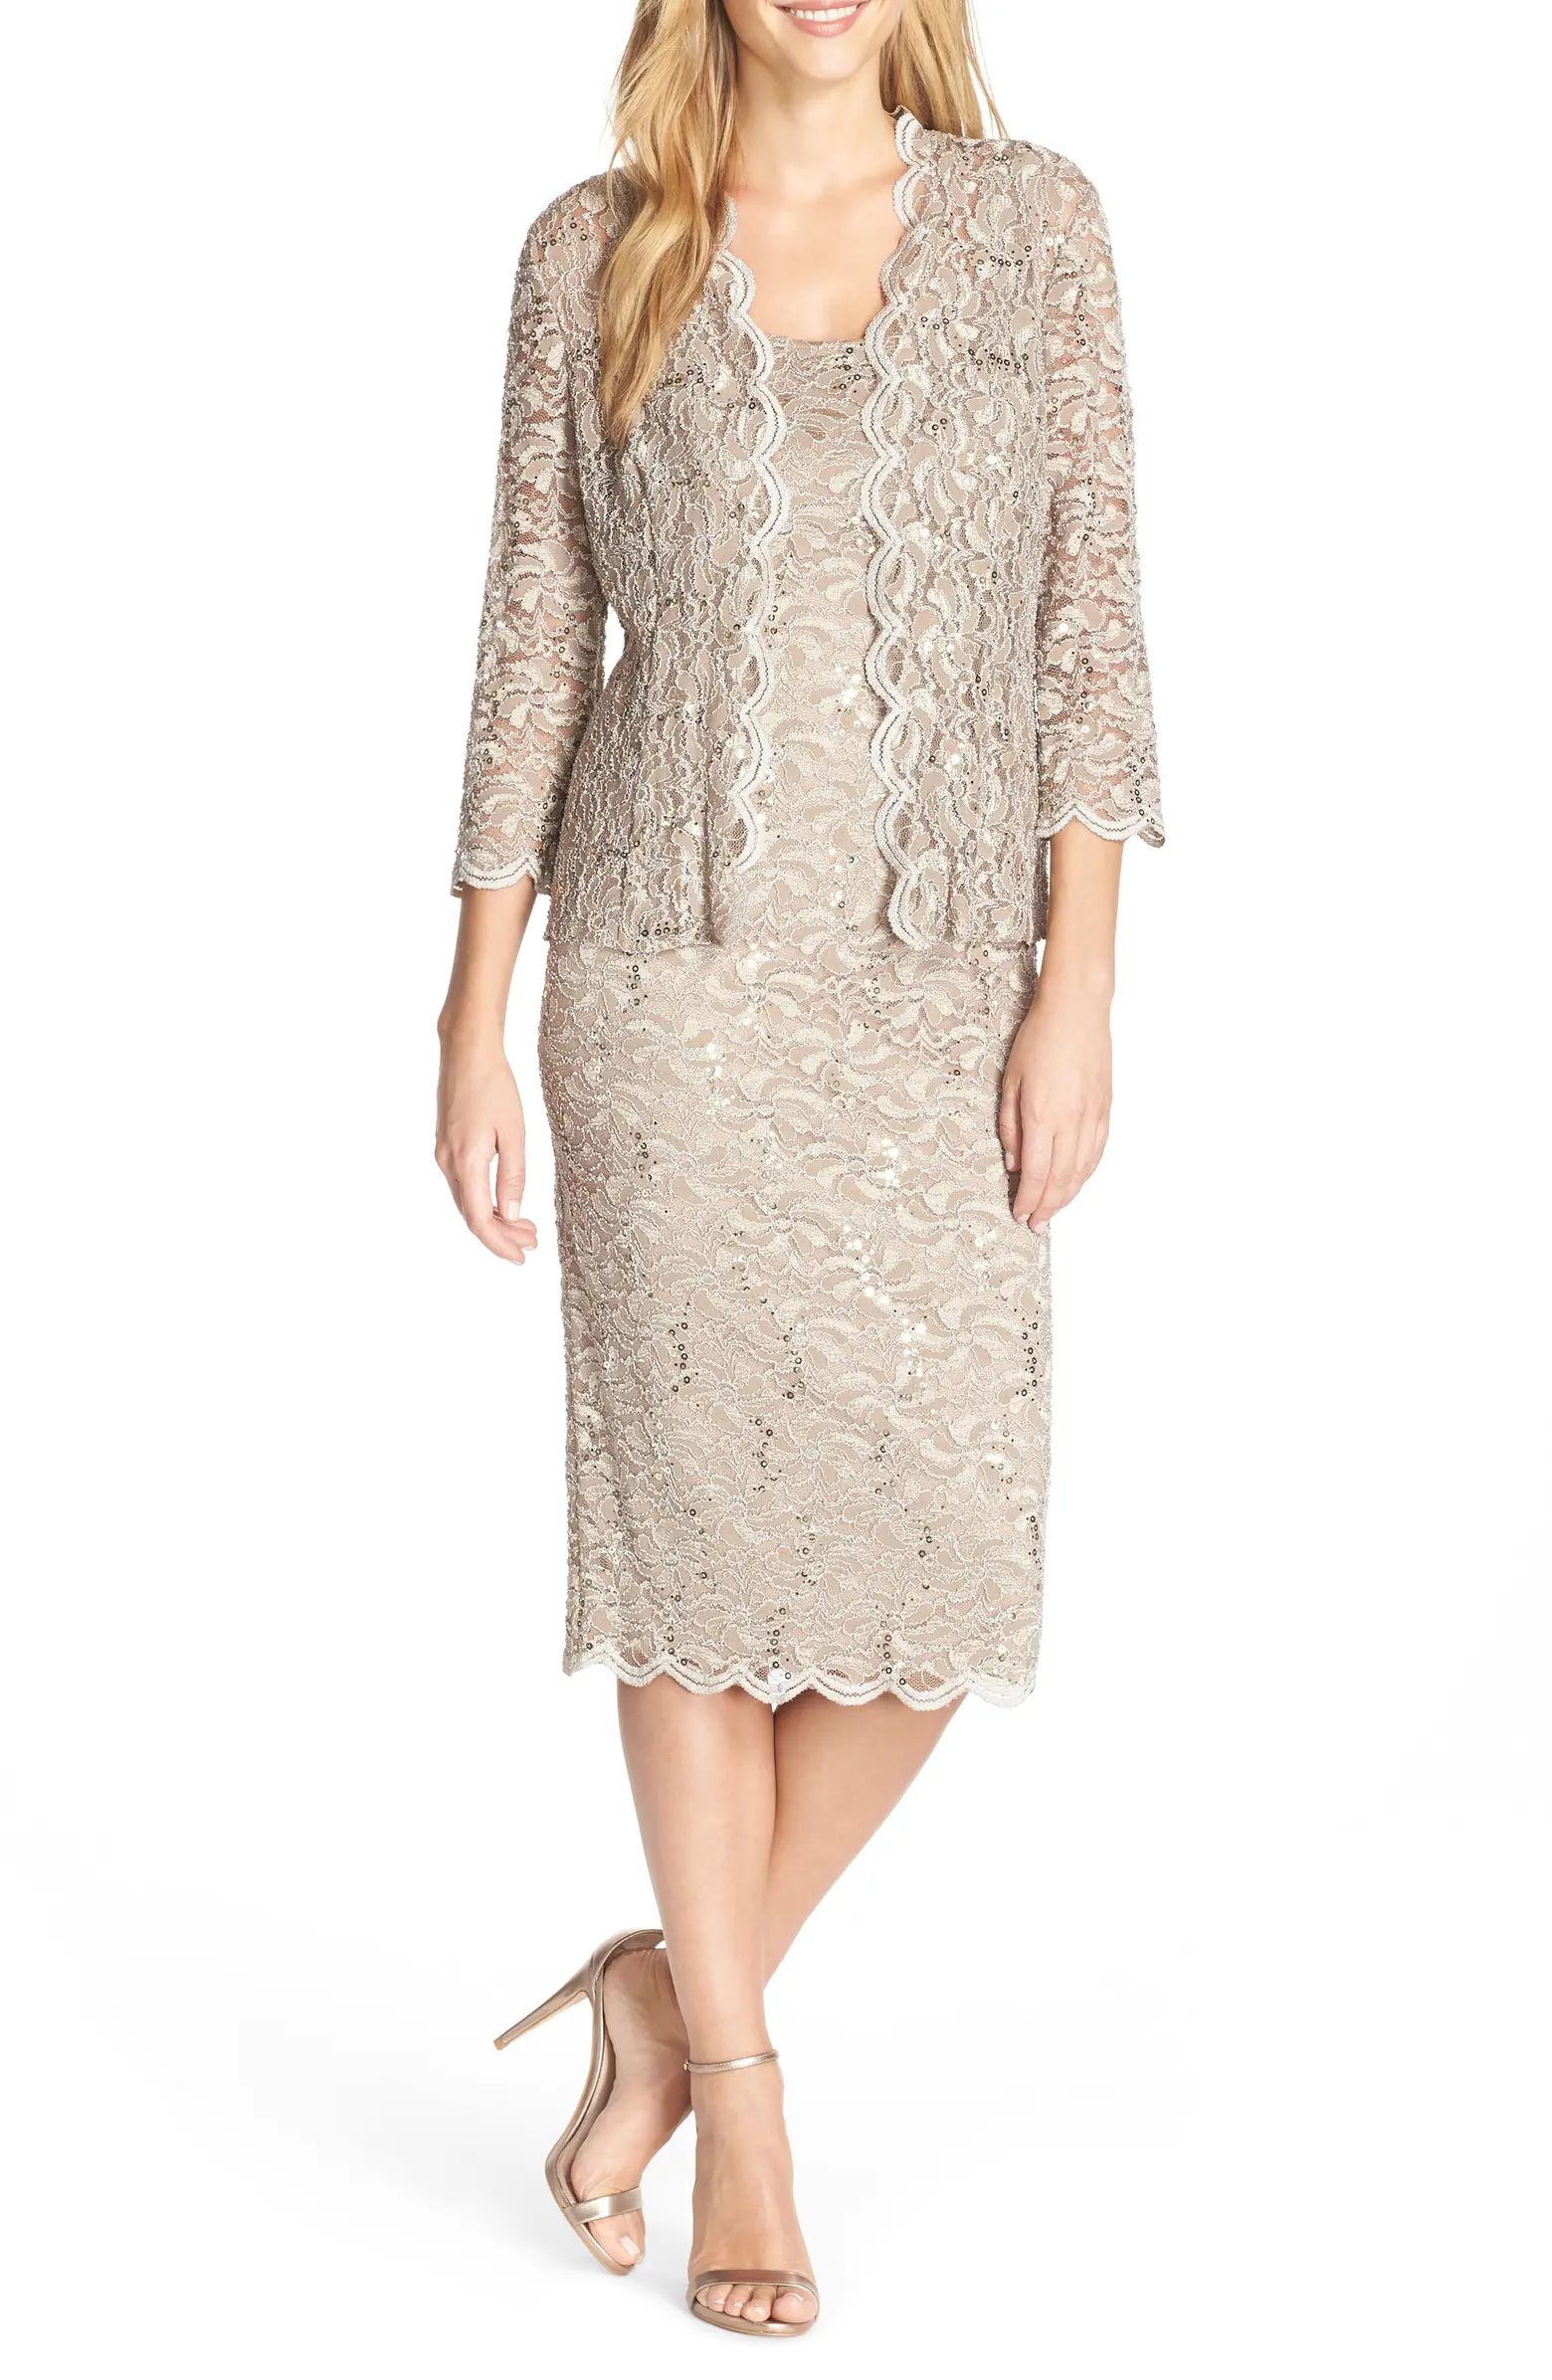 Lace Cocktail Dress with Jacket | Nordstrom